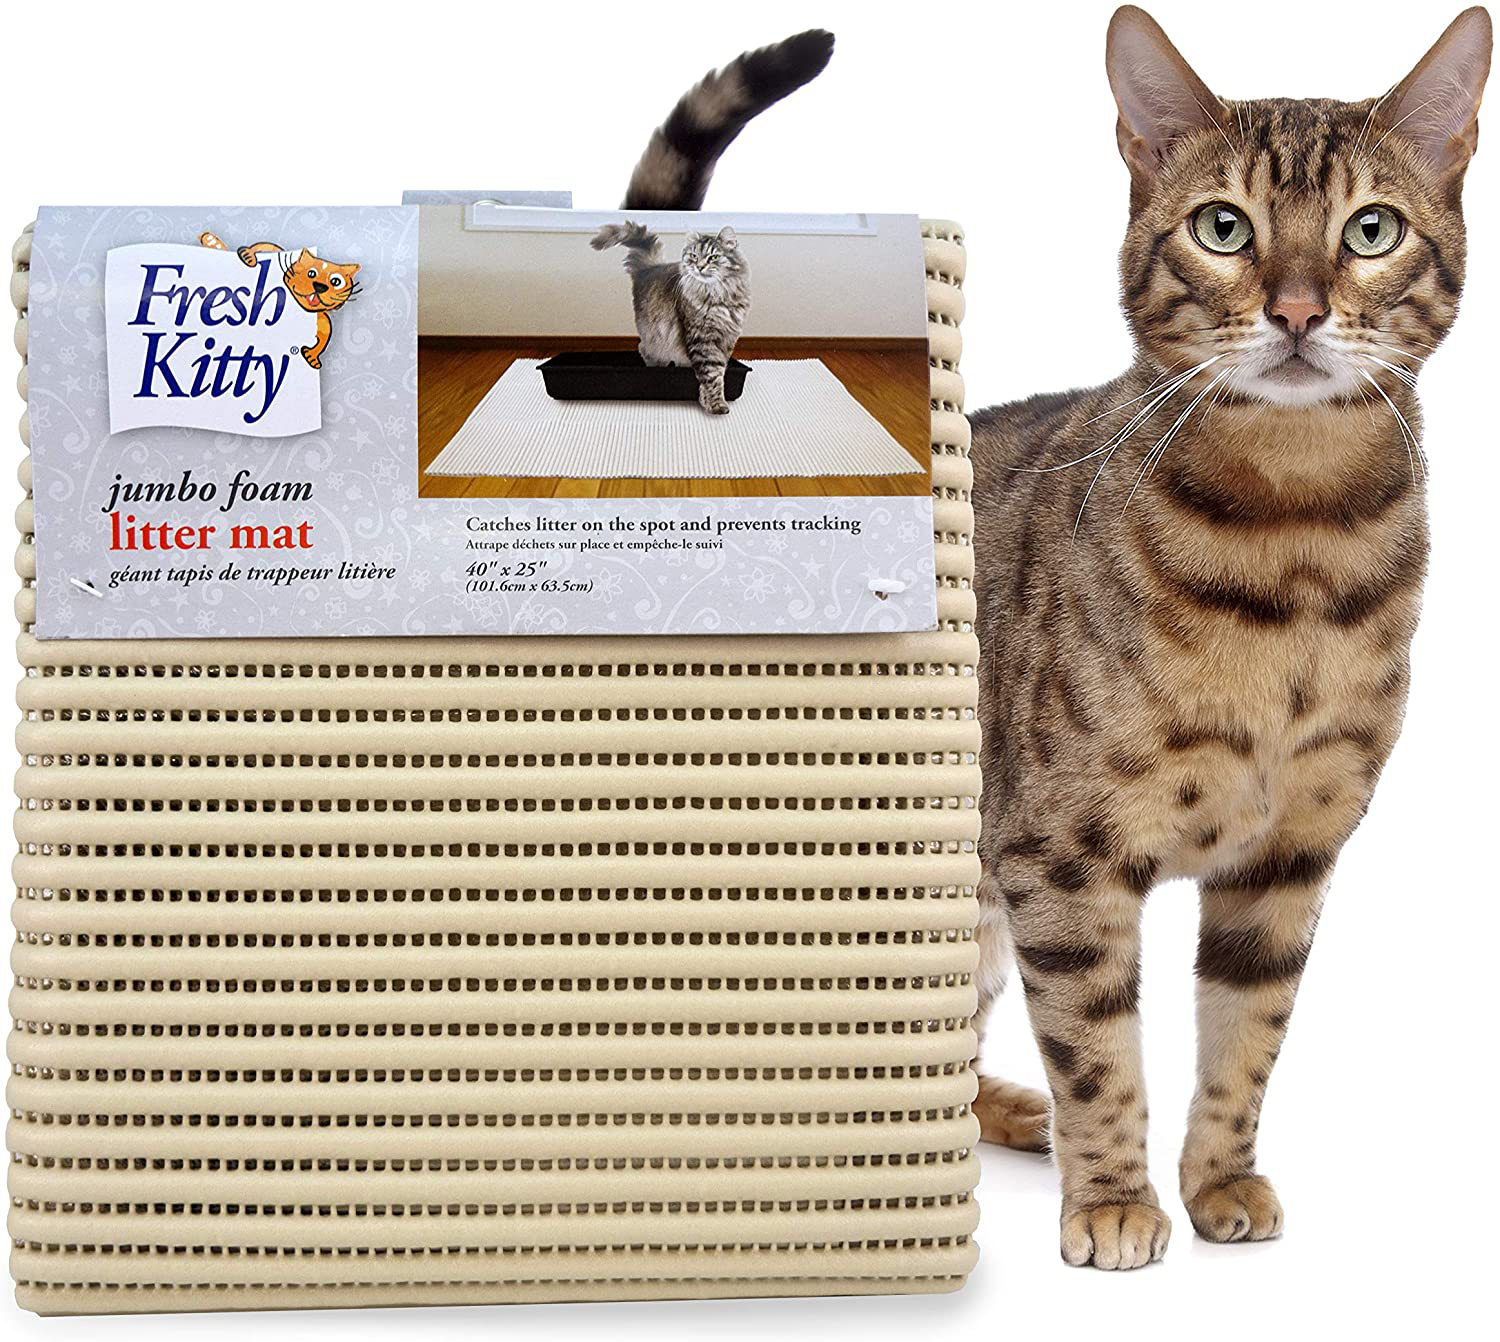 Fresh Kitty Durable XL Jumbo Foam Litter Mat – BPA and Phthalate Free, Water Resistant, Traps Litter from Box, Scatter Control, Easy Clean Mats 40"X25" (9027)